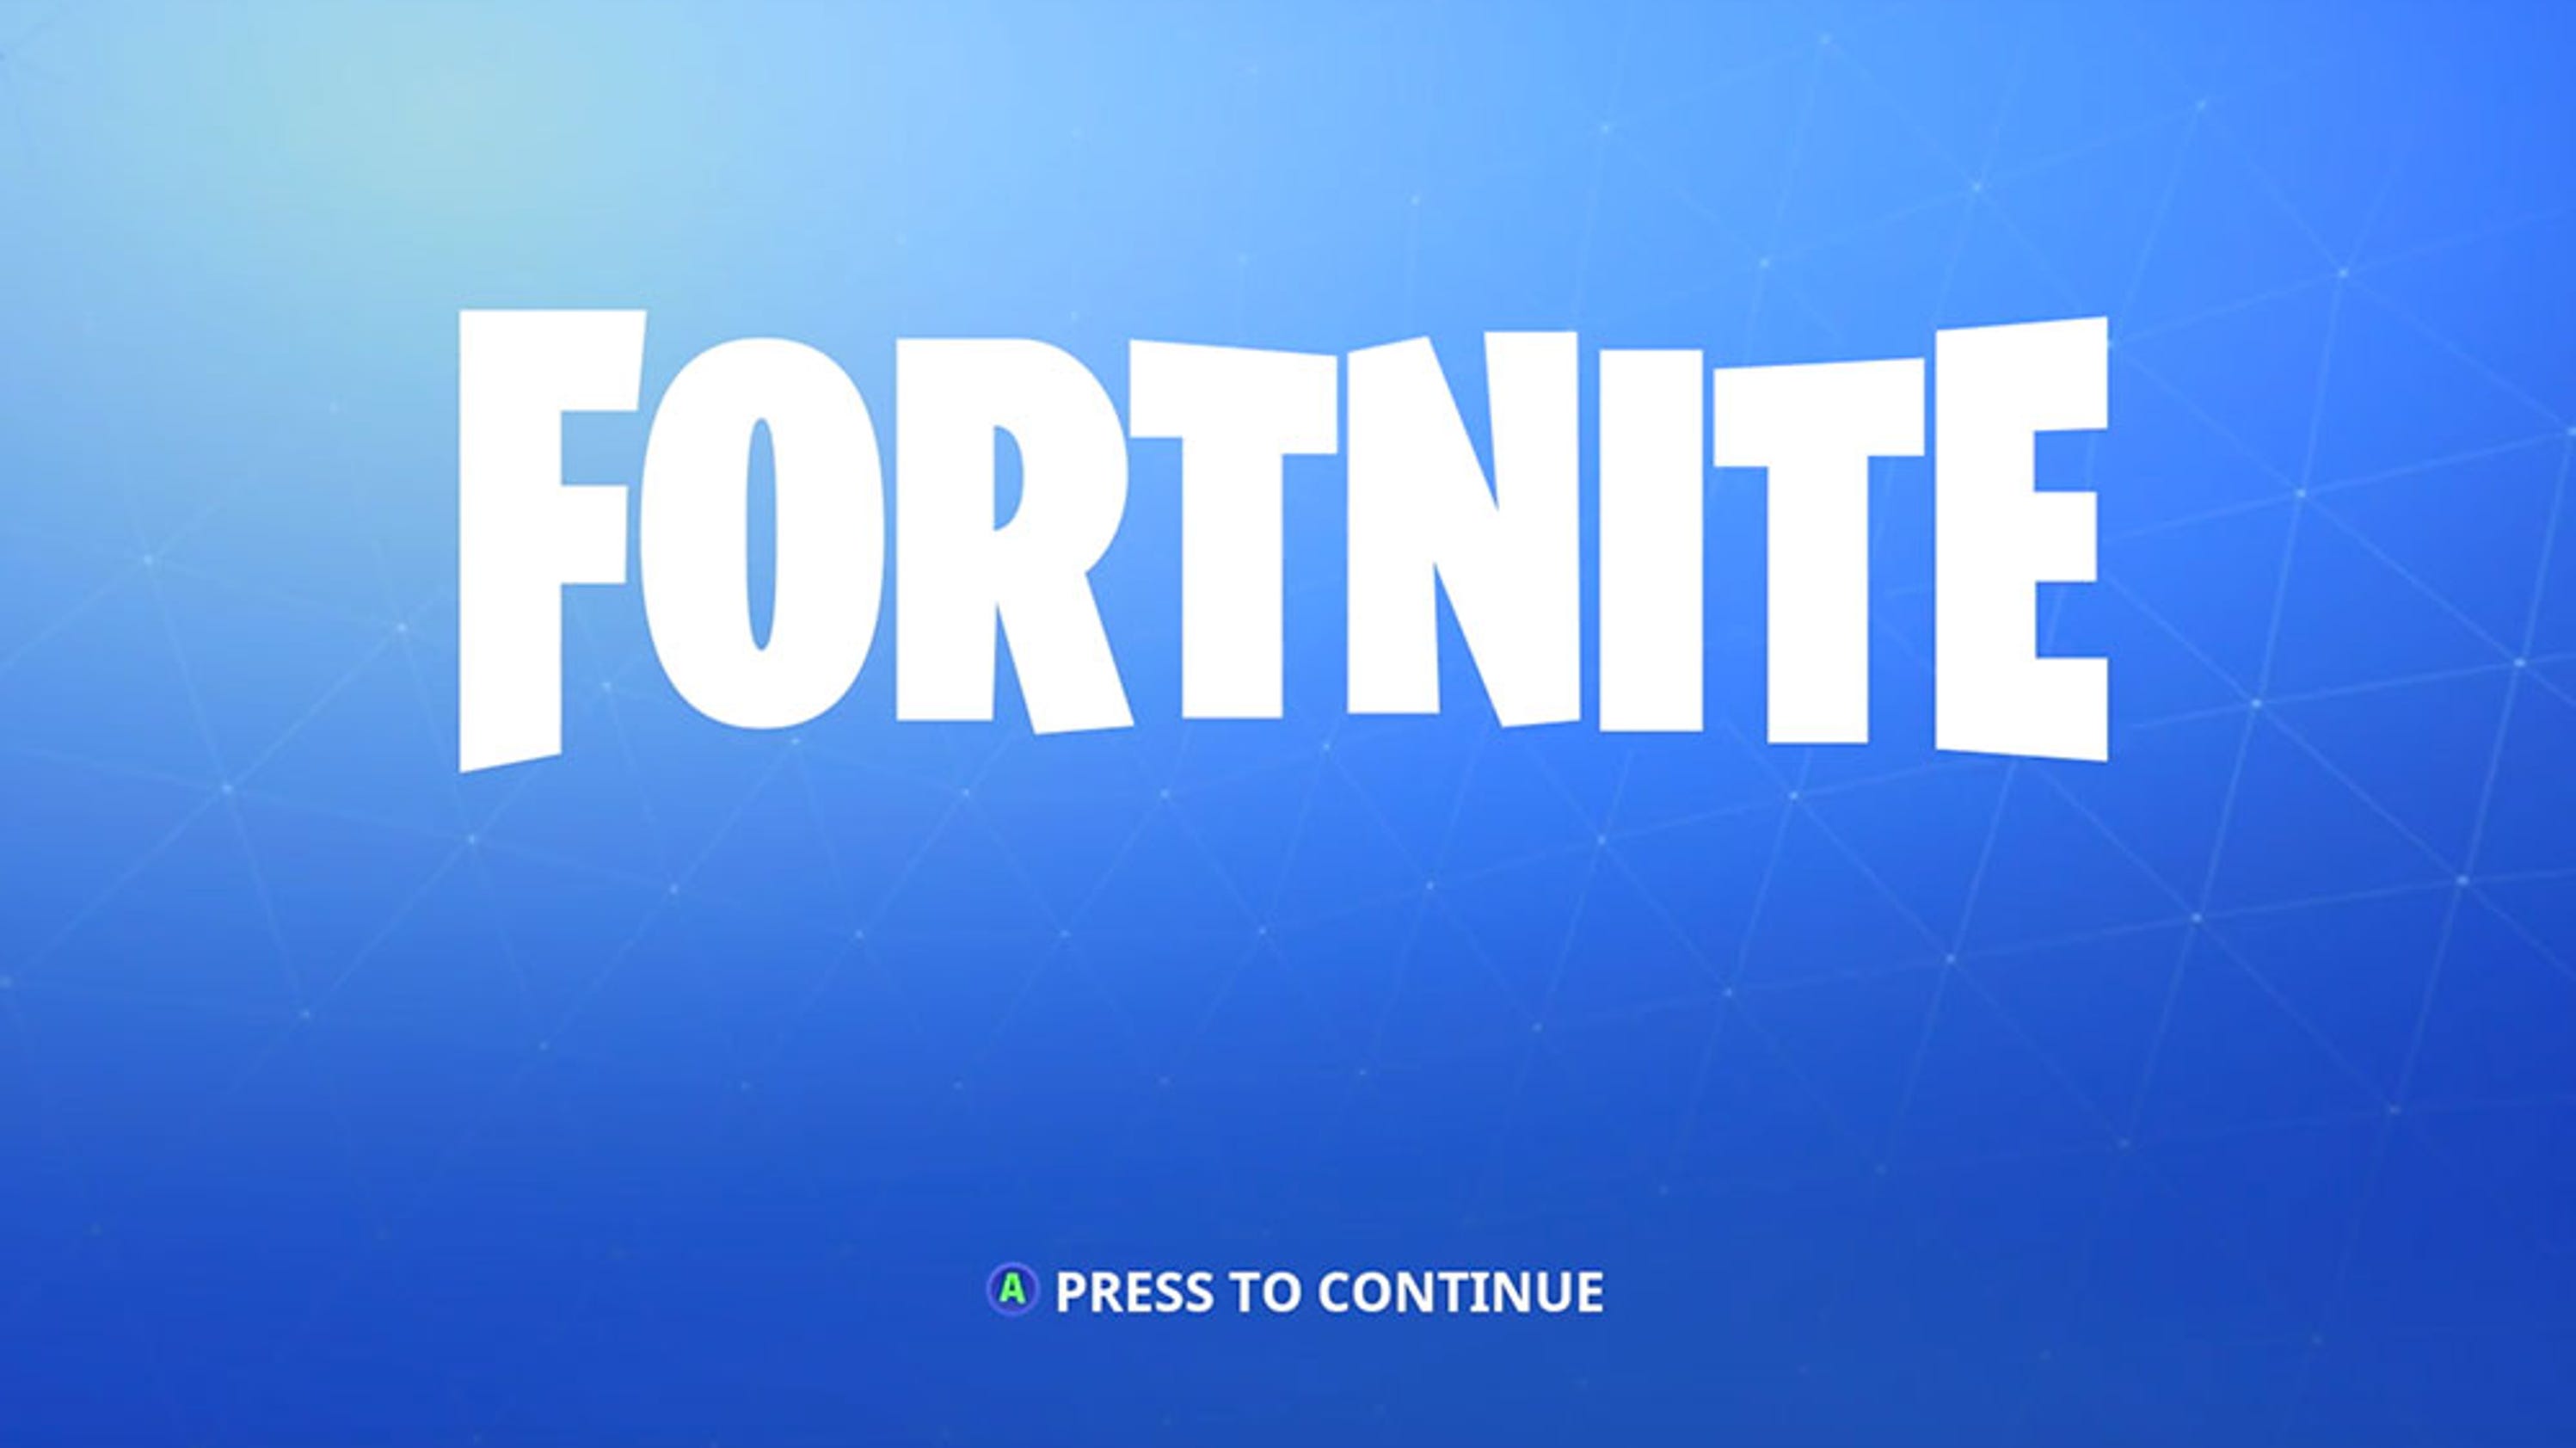 Fortnite is taking over the sports world3200 x 1680